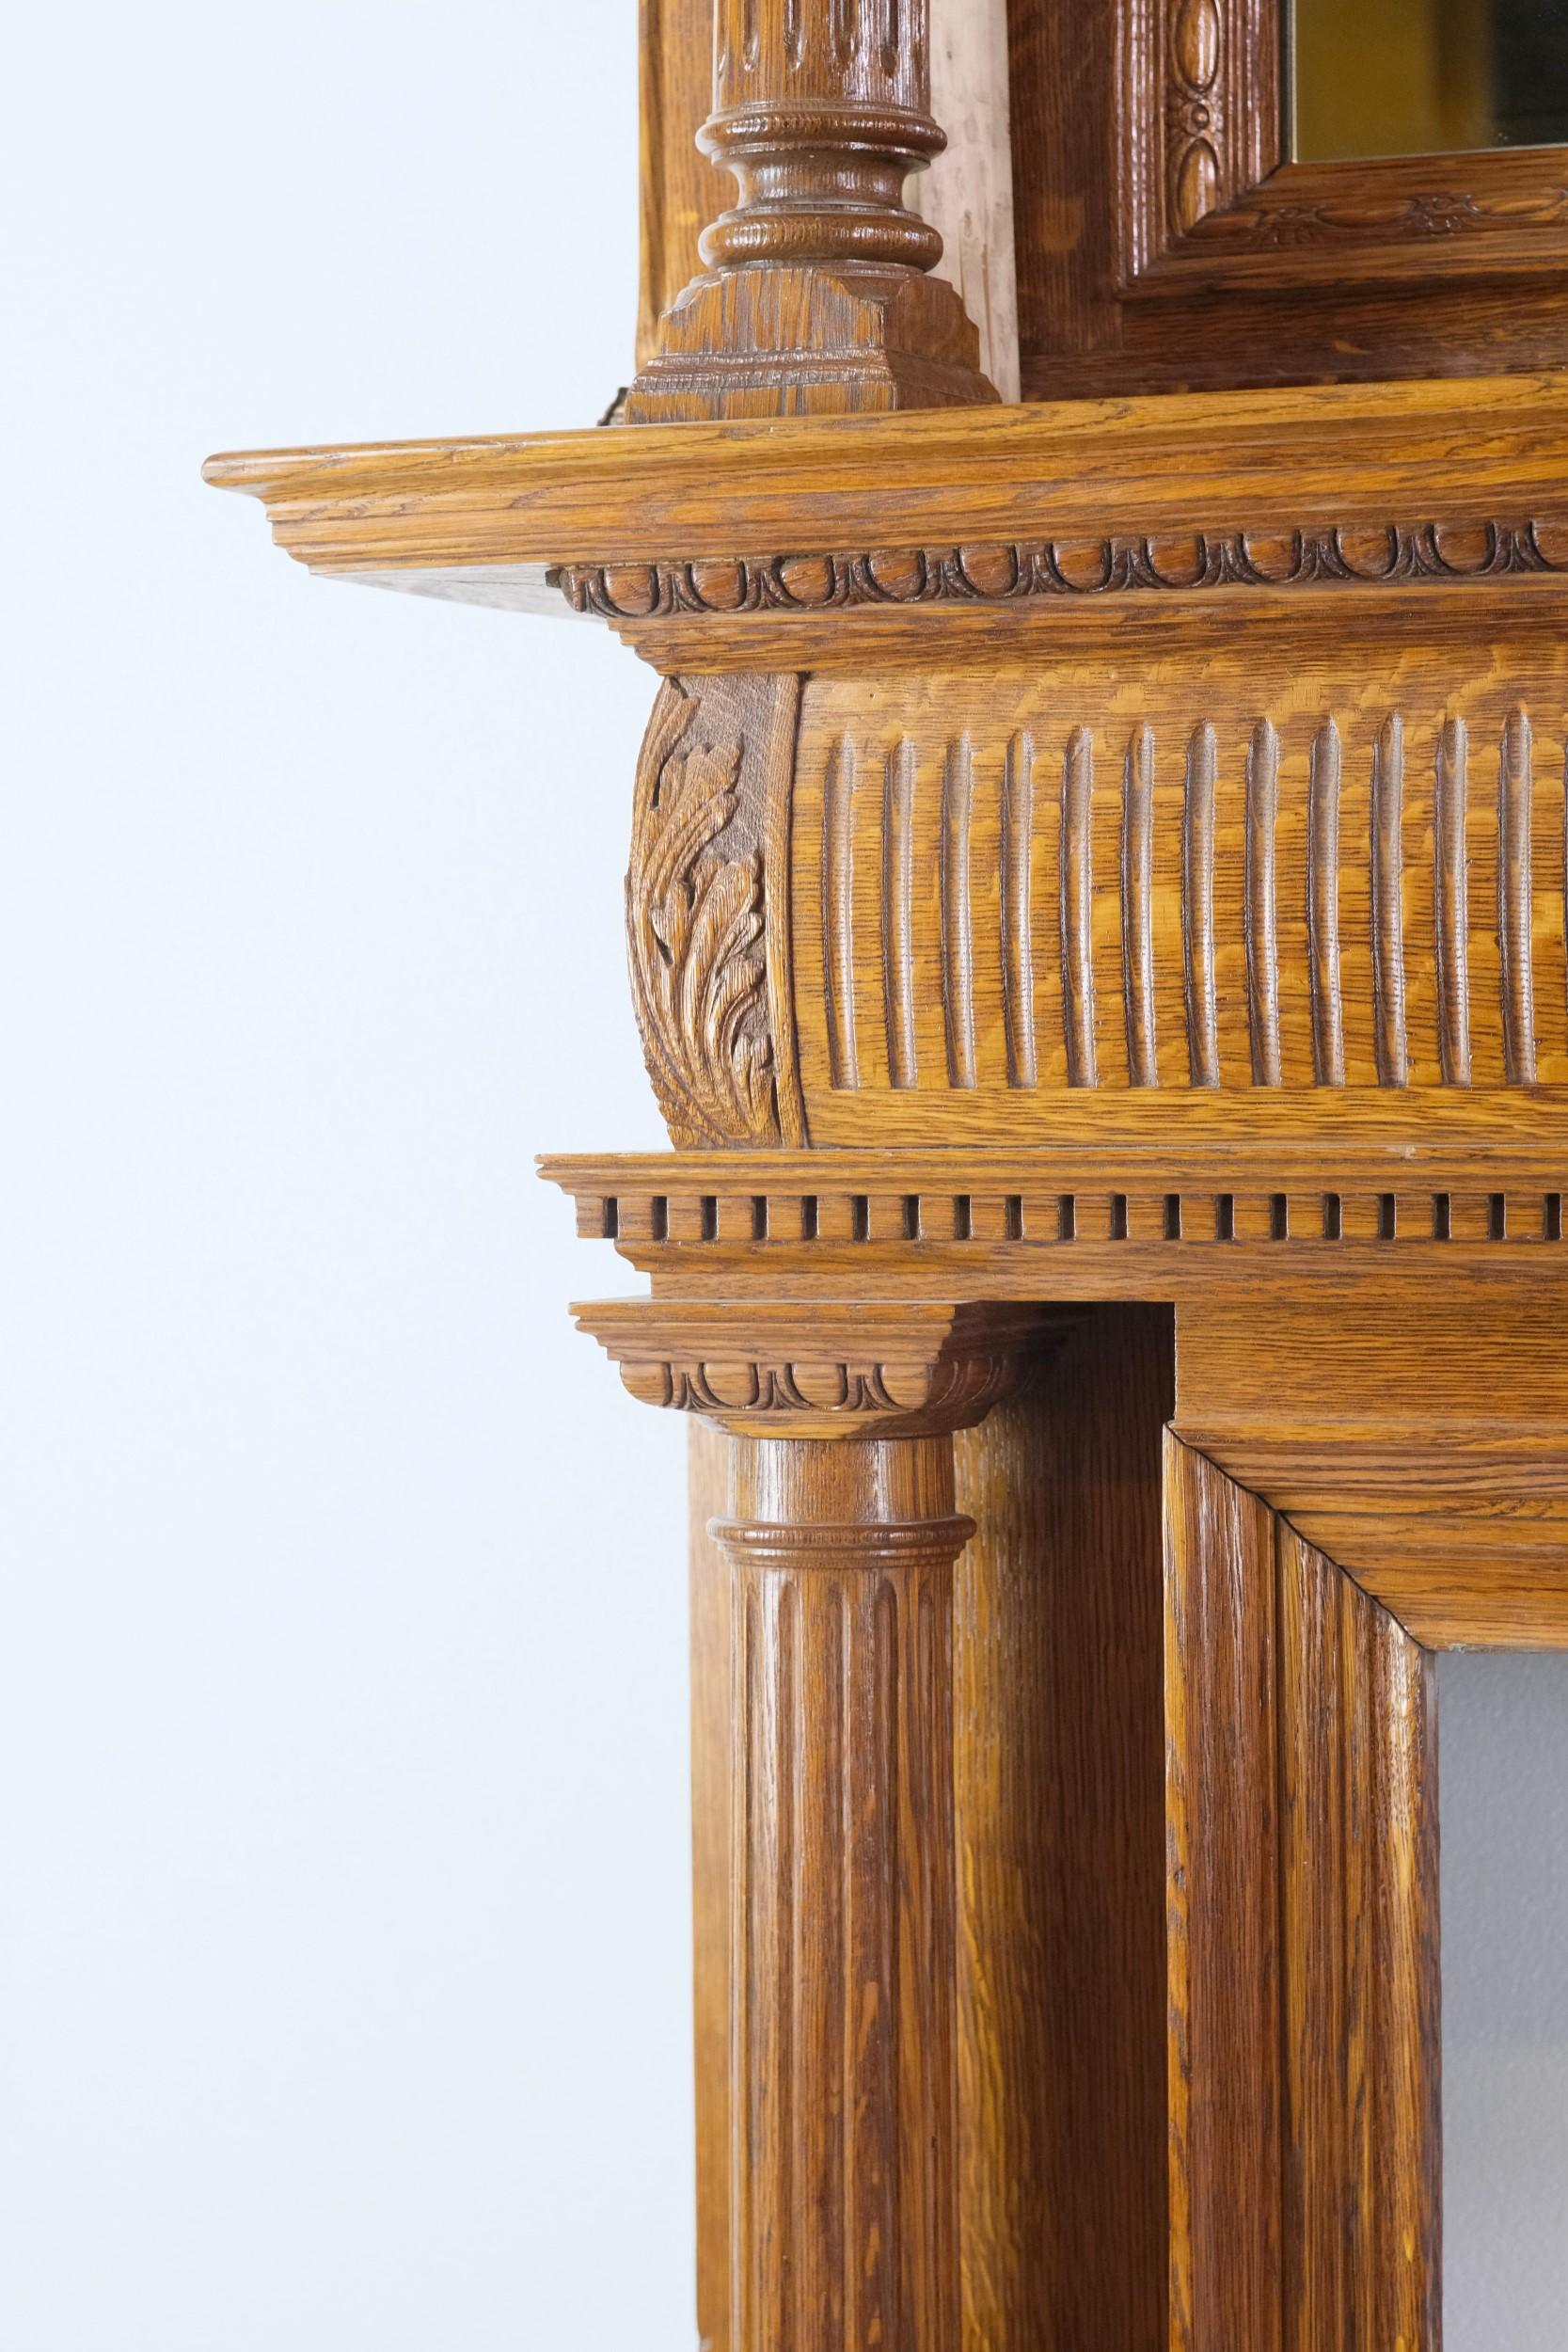 Turn of the century two tier or double decker tiger oak mantel with fluted columns and mirror. It is accented with carved foliage details, egg & dart design and dentil molding. There are two sets of fluted columns, one set on the bottom half and one